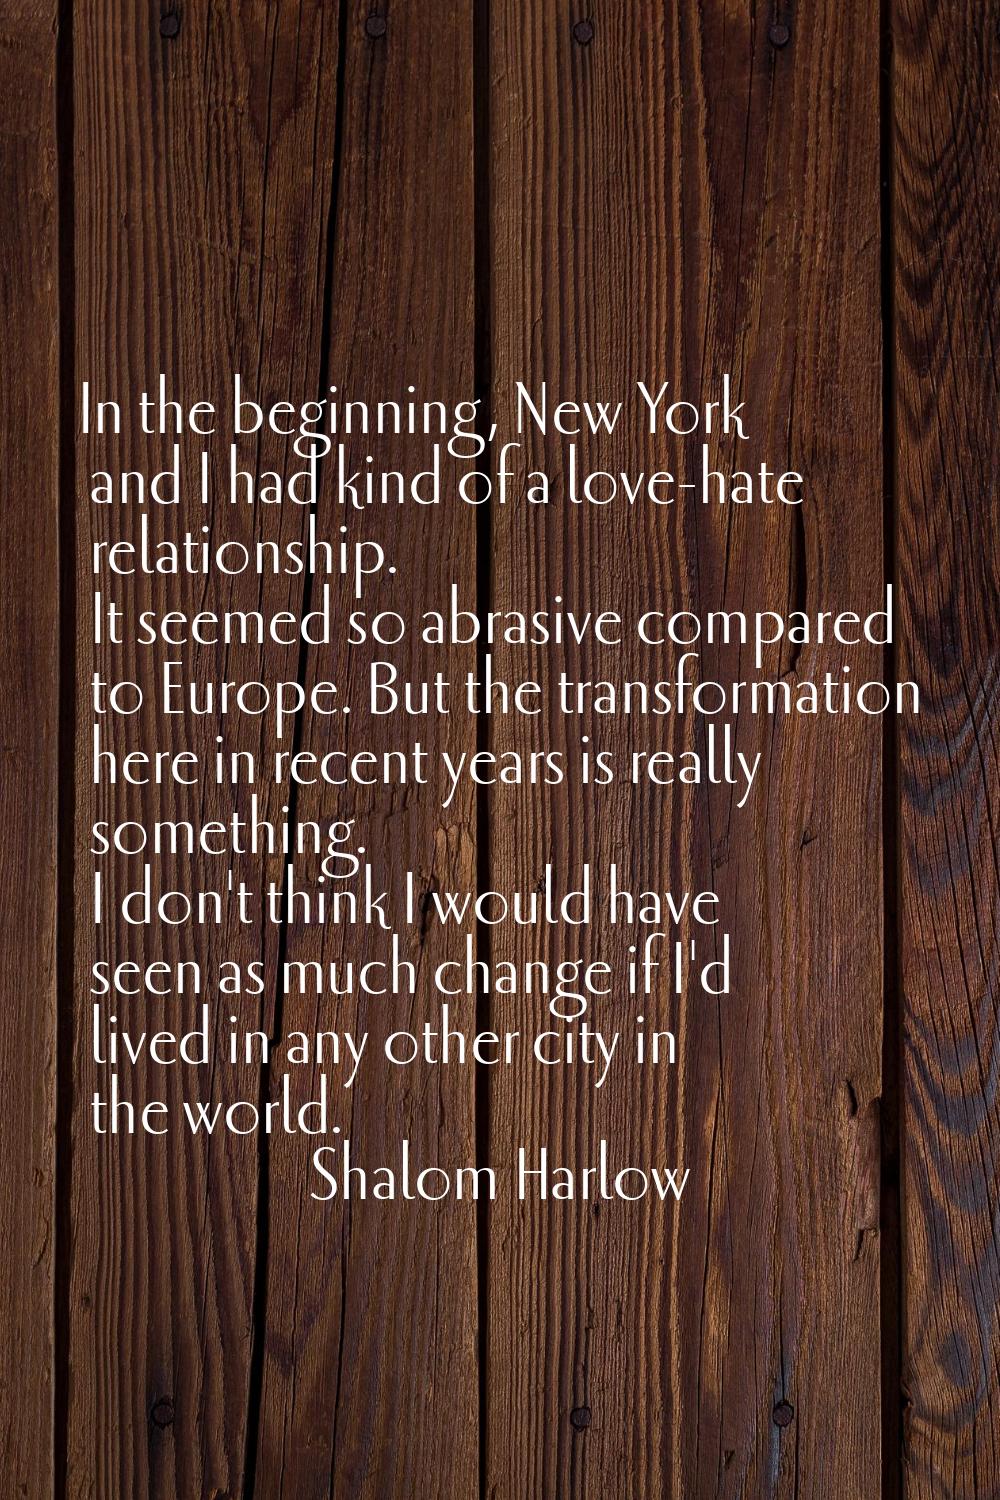 In the beginning, New York and I had kind of a love-hate relationship. It seemed so abrasive compar